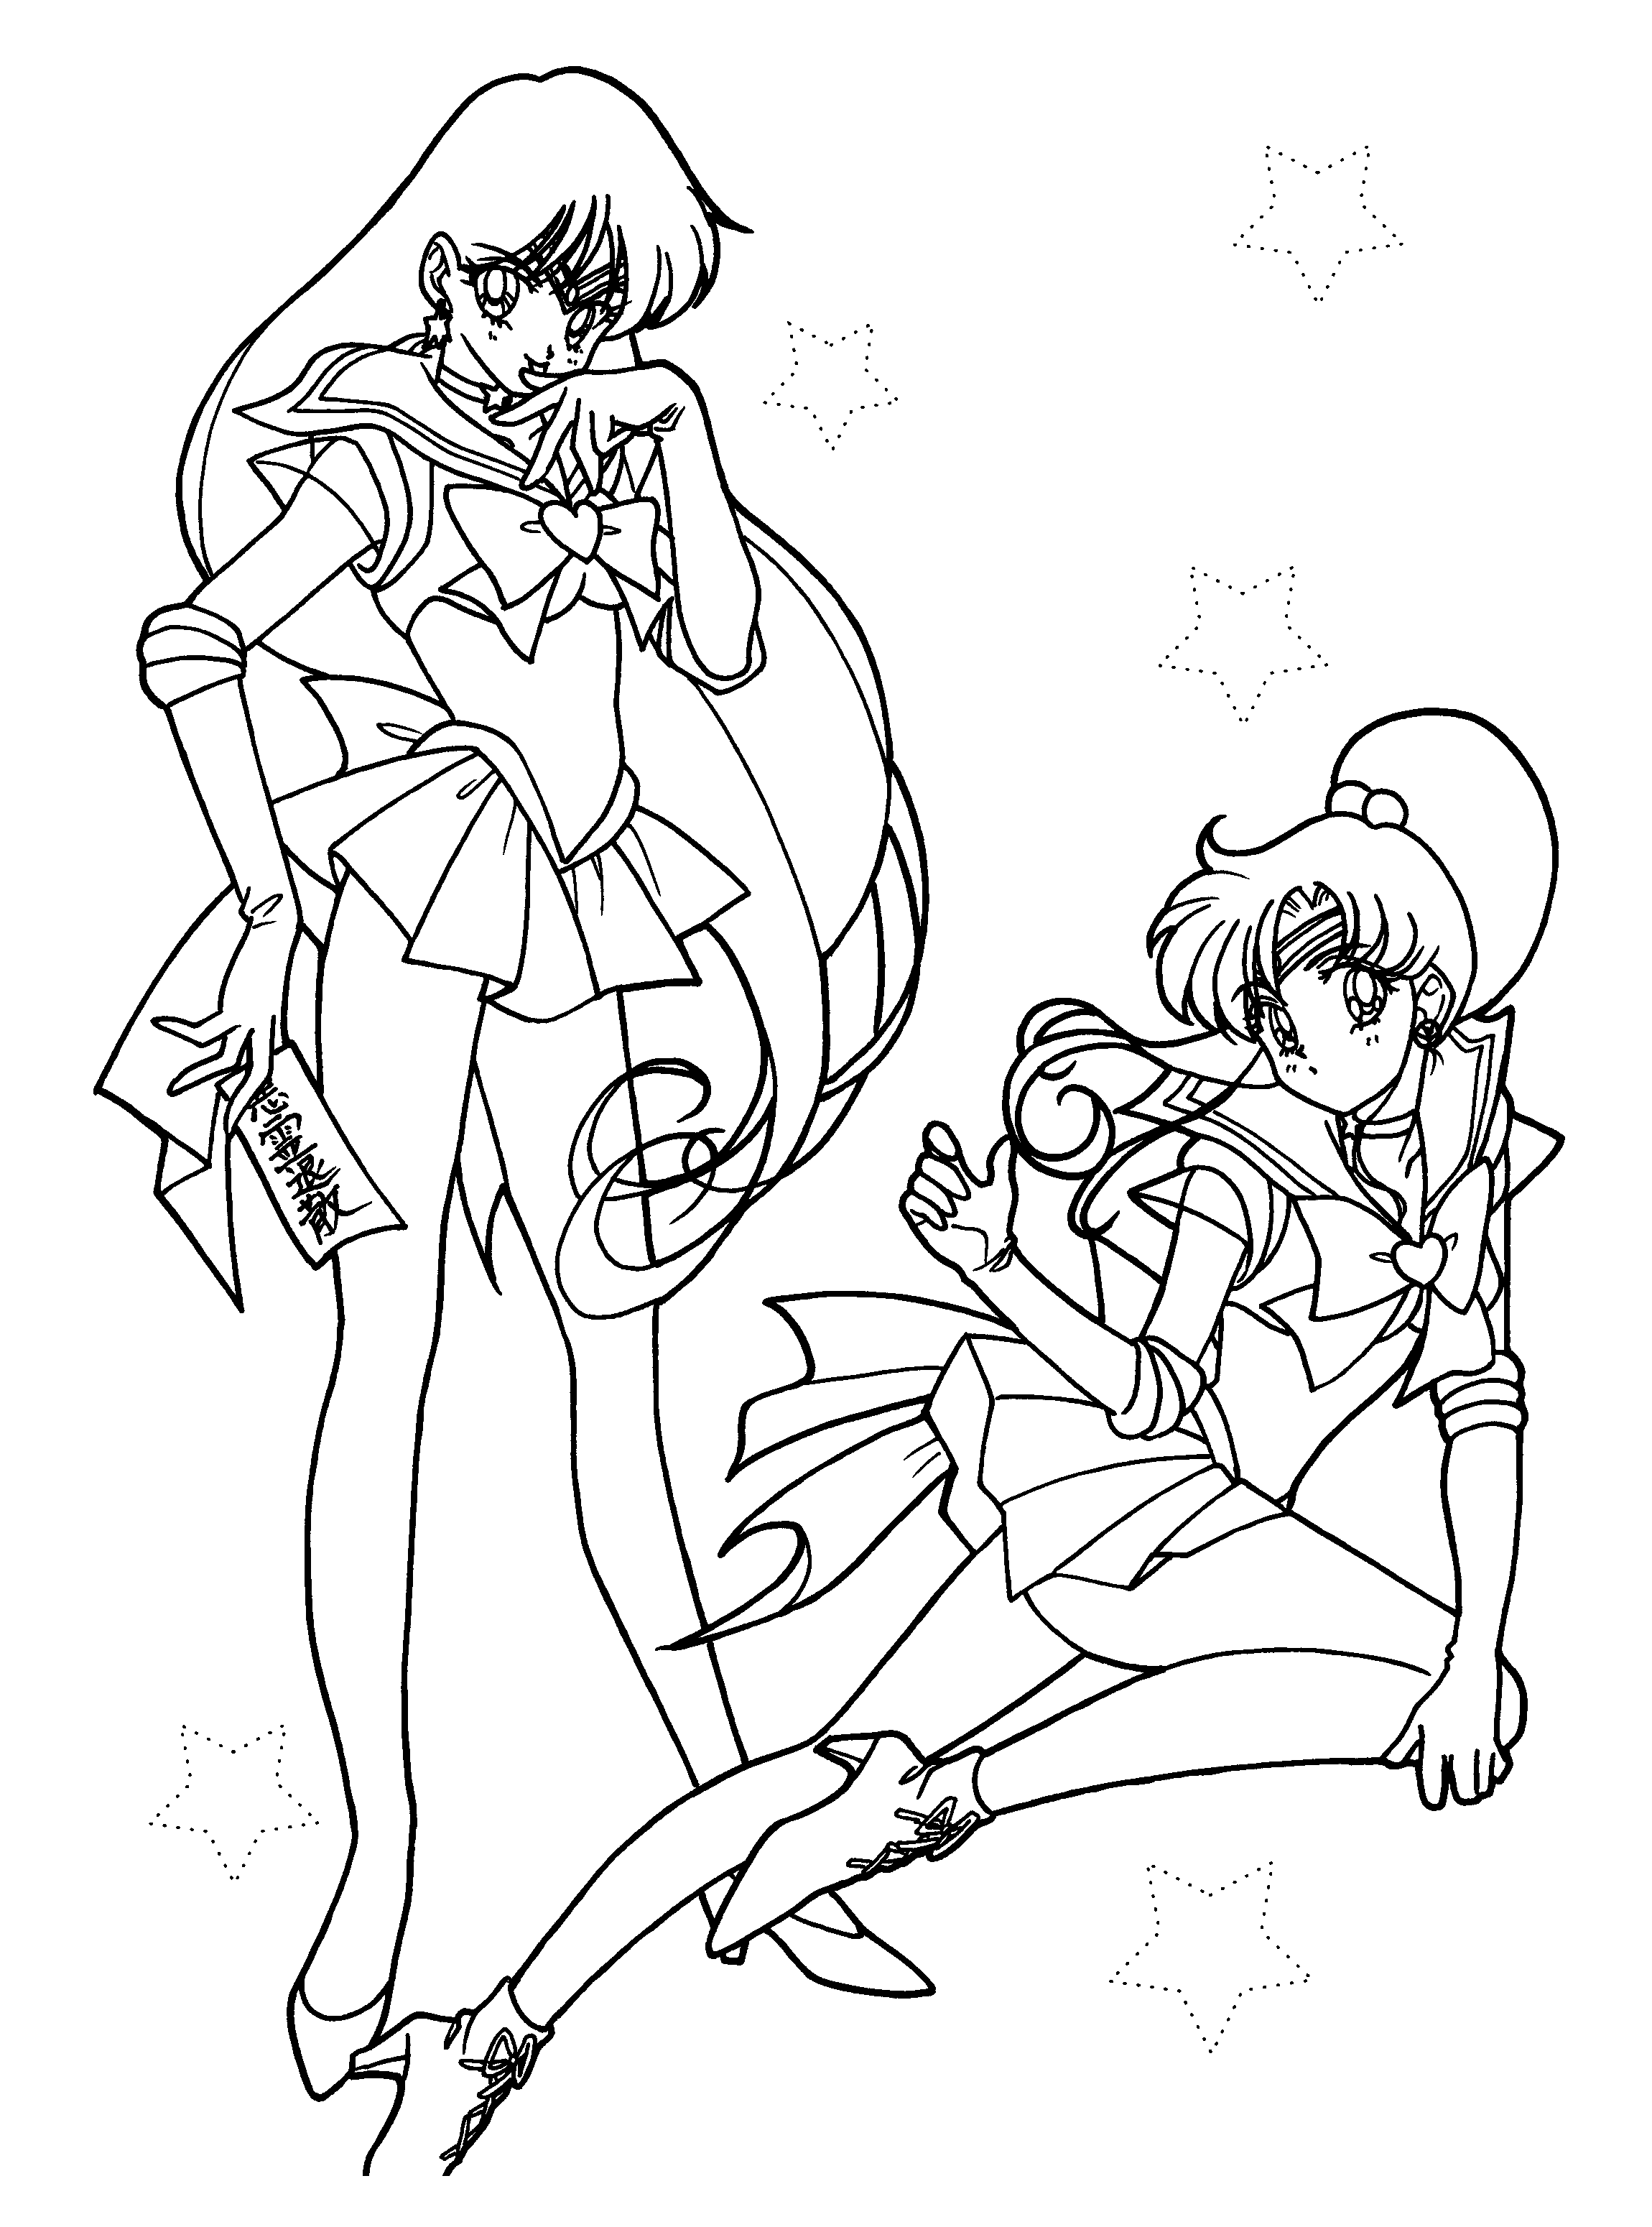 animated-coloring-pages-sailor-moon-image-0013